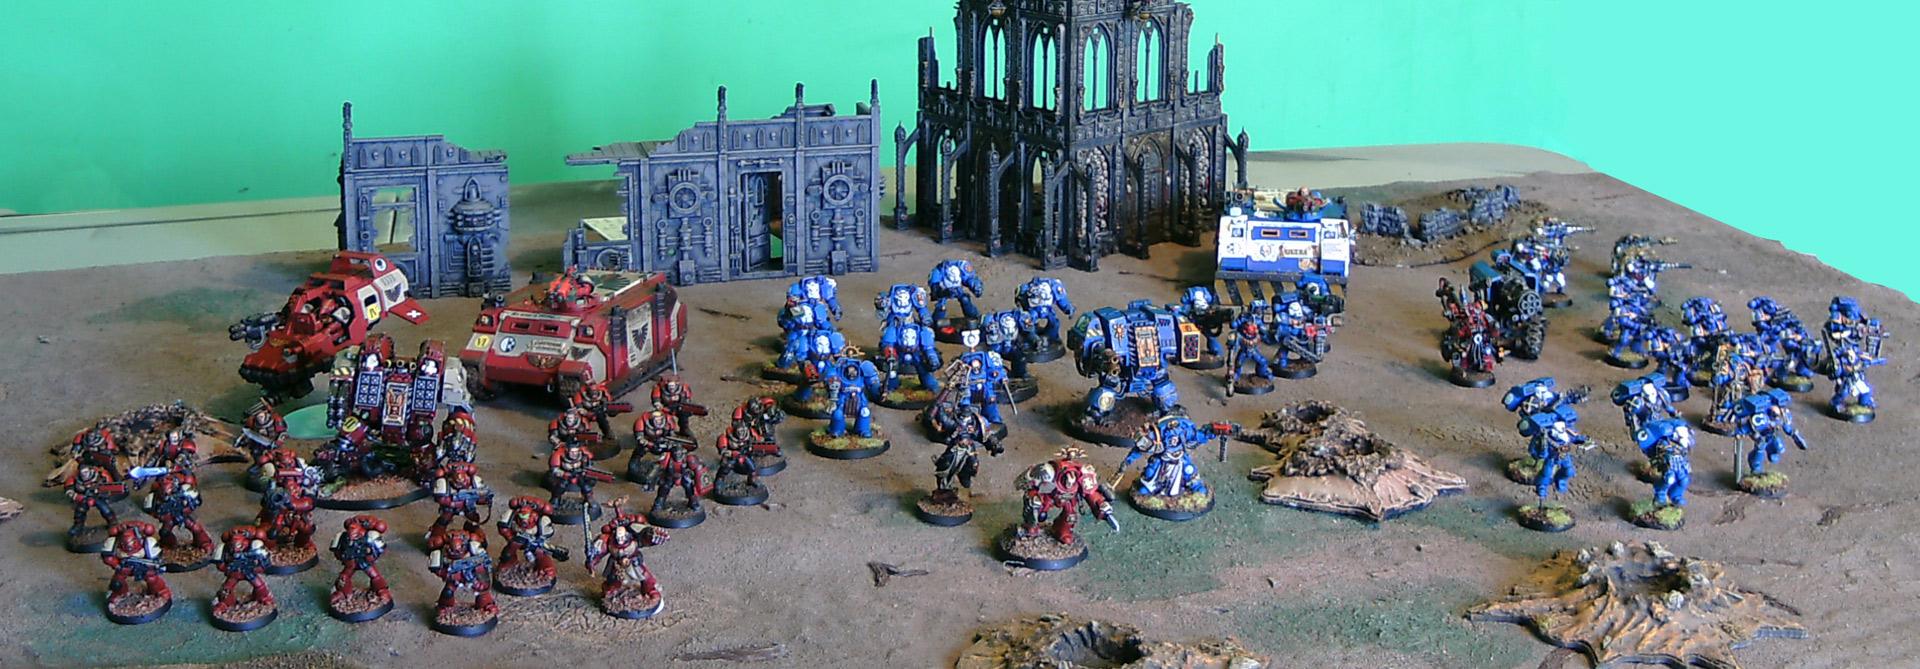 Blood Ravens, Complete Army, Ouze, Space Marines, Ultramarines, Warhammer 40,000